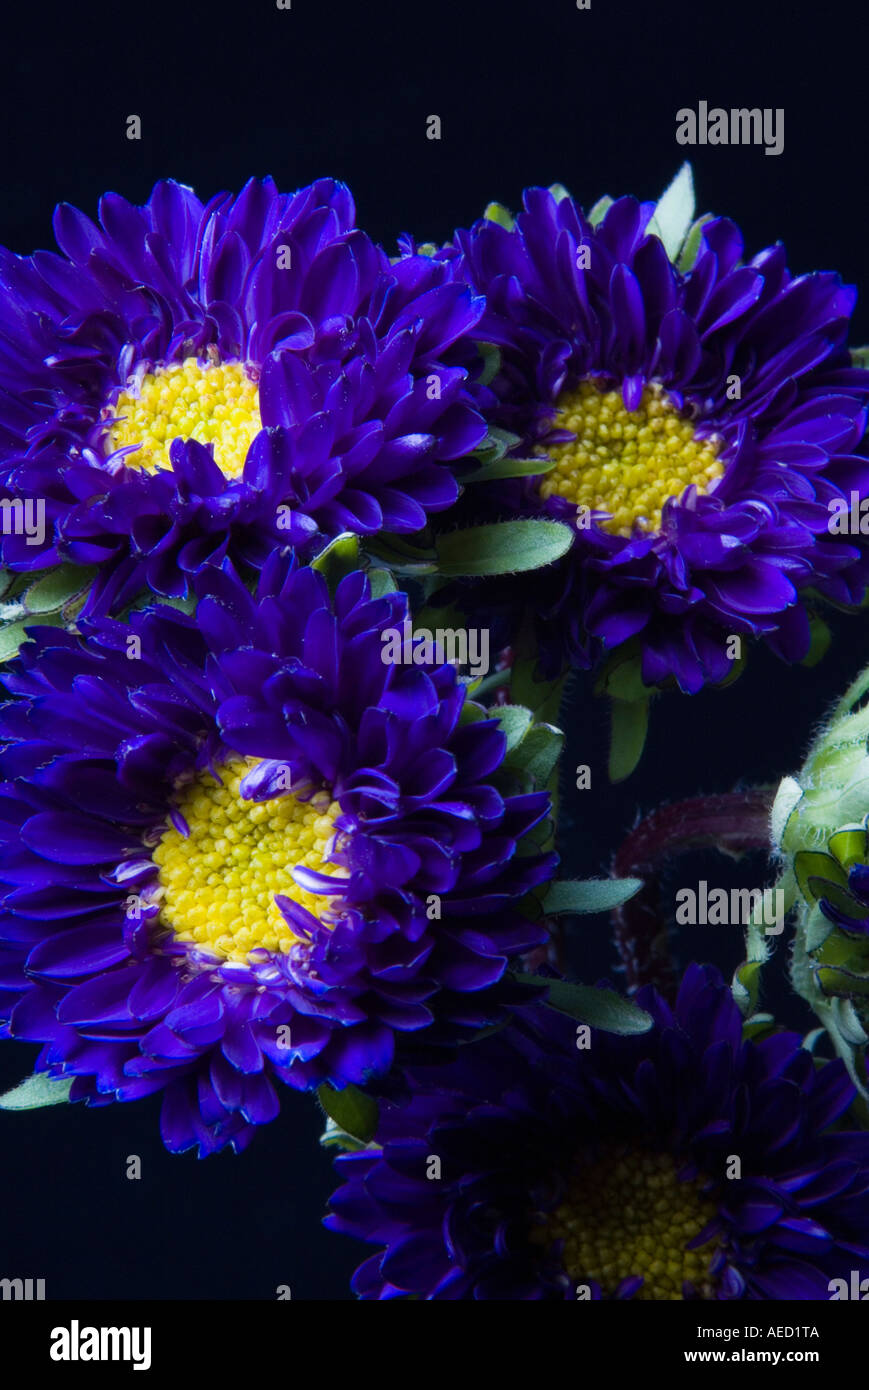 Blue Matsumoto Asters on black background Stock Photo